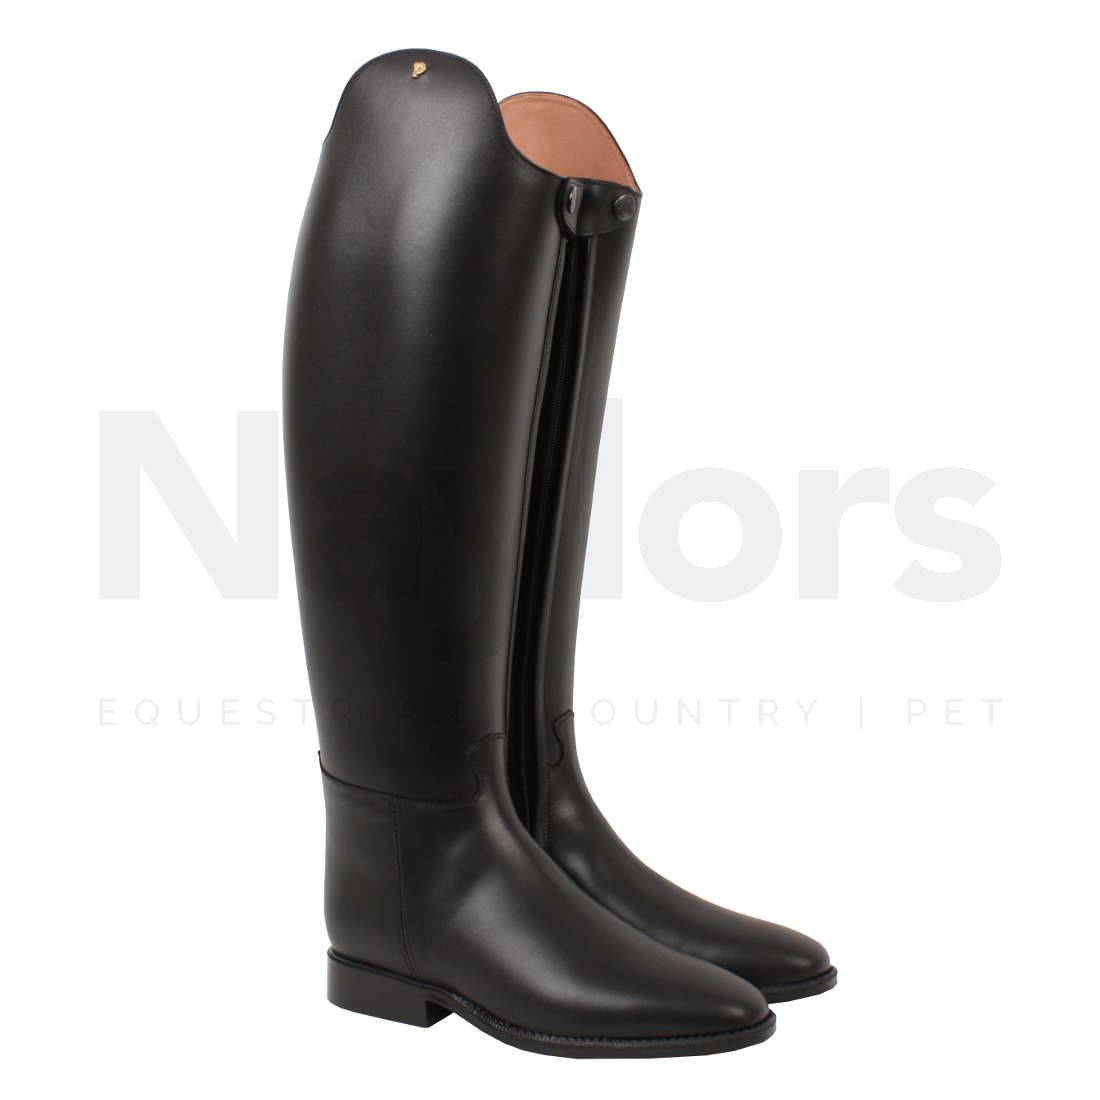 Petrie Olympic Custom Dress Boot Petrie Boots Petrie - Equestrian Fashion Outfitters